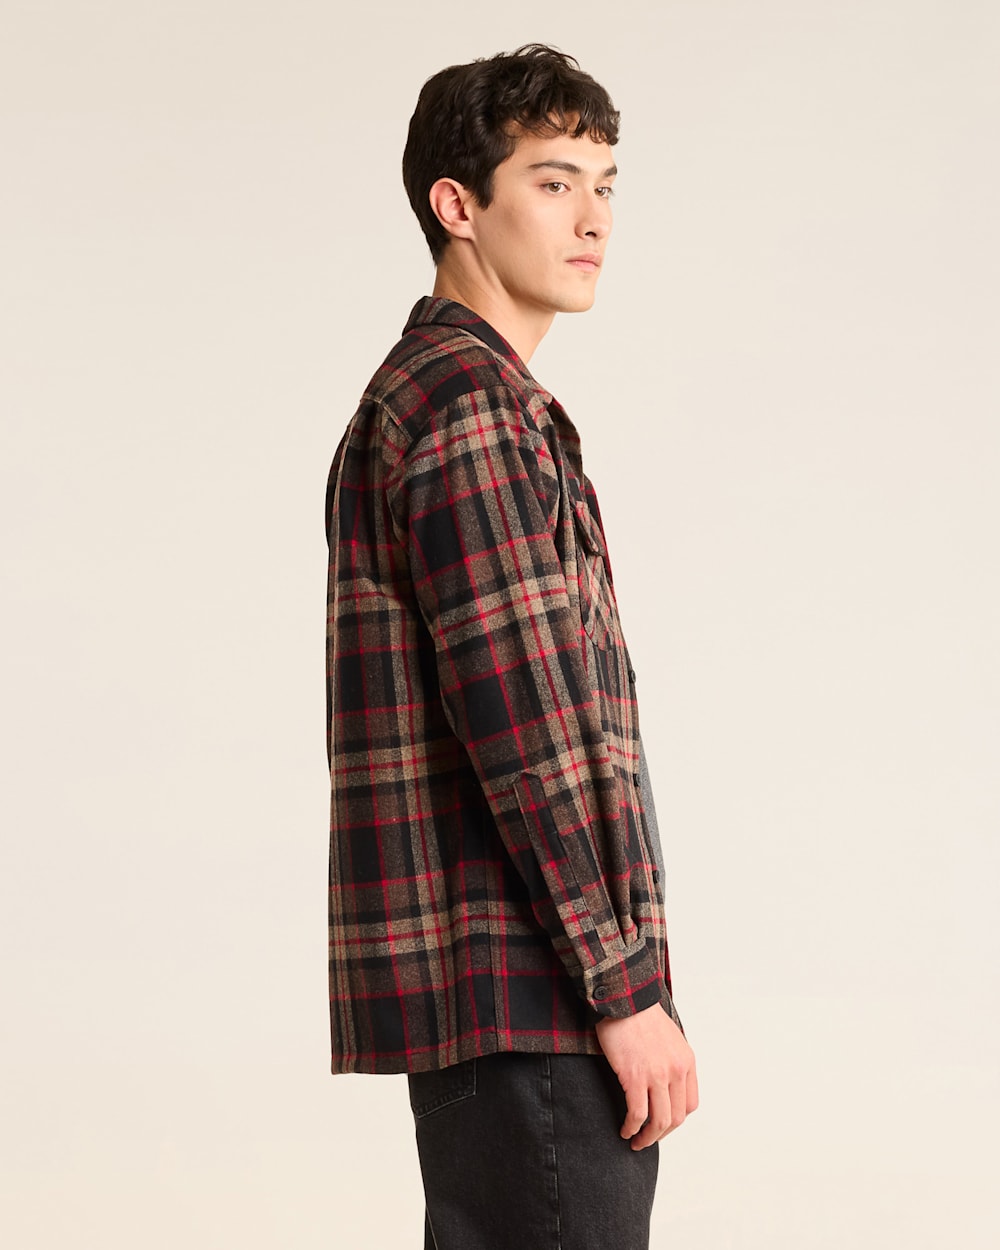 ALTERNATE VIEW OF MEN'S PLAID BOARD SHIRT IN BROWN MIX image number 2